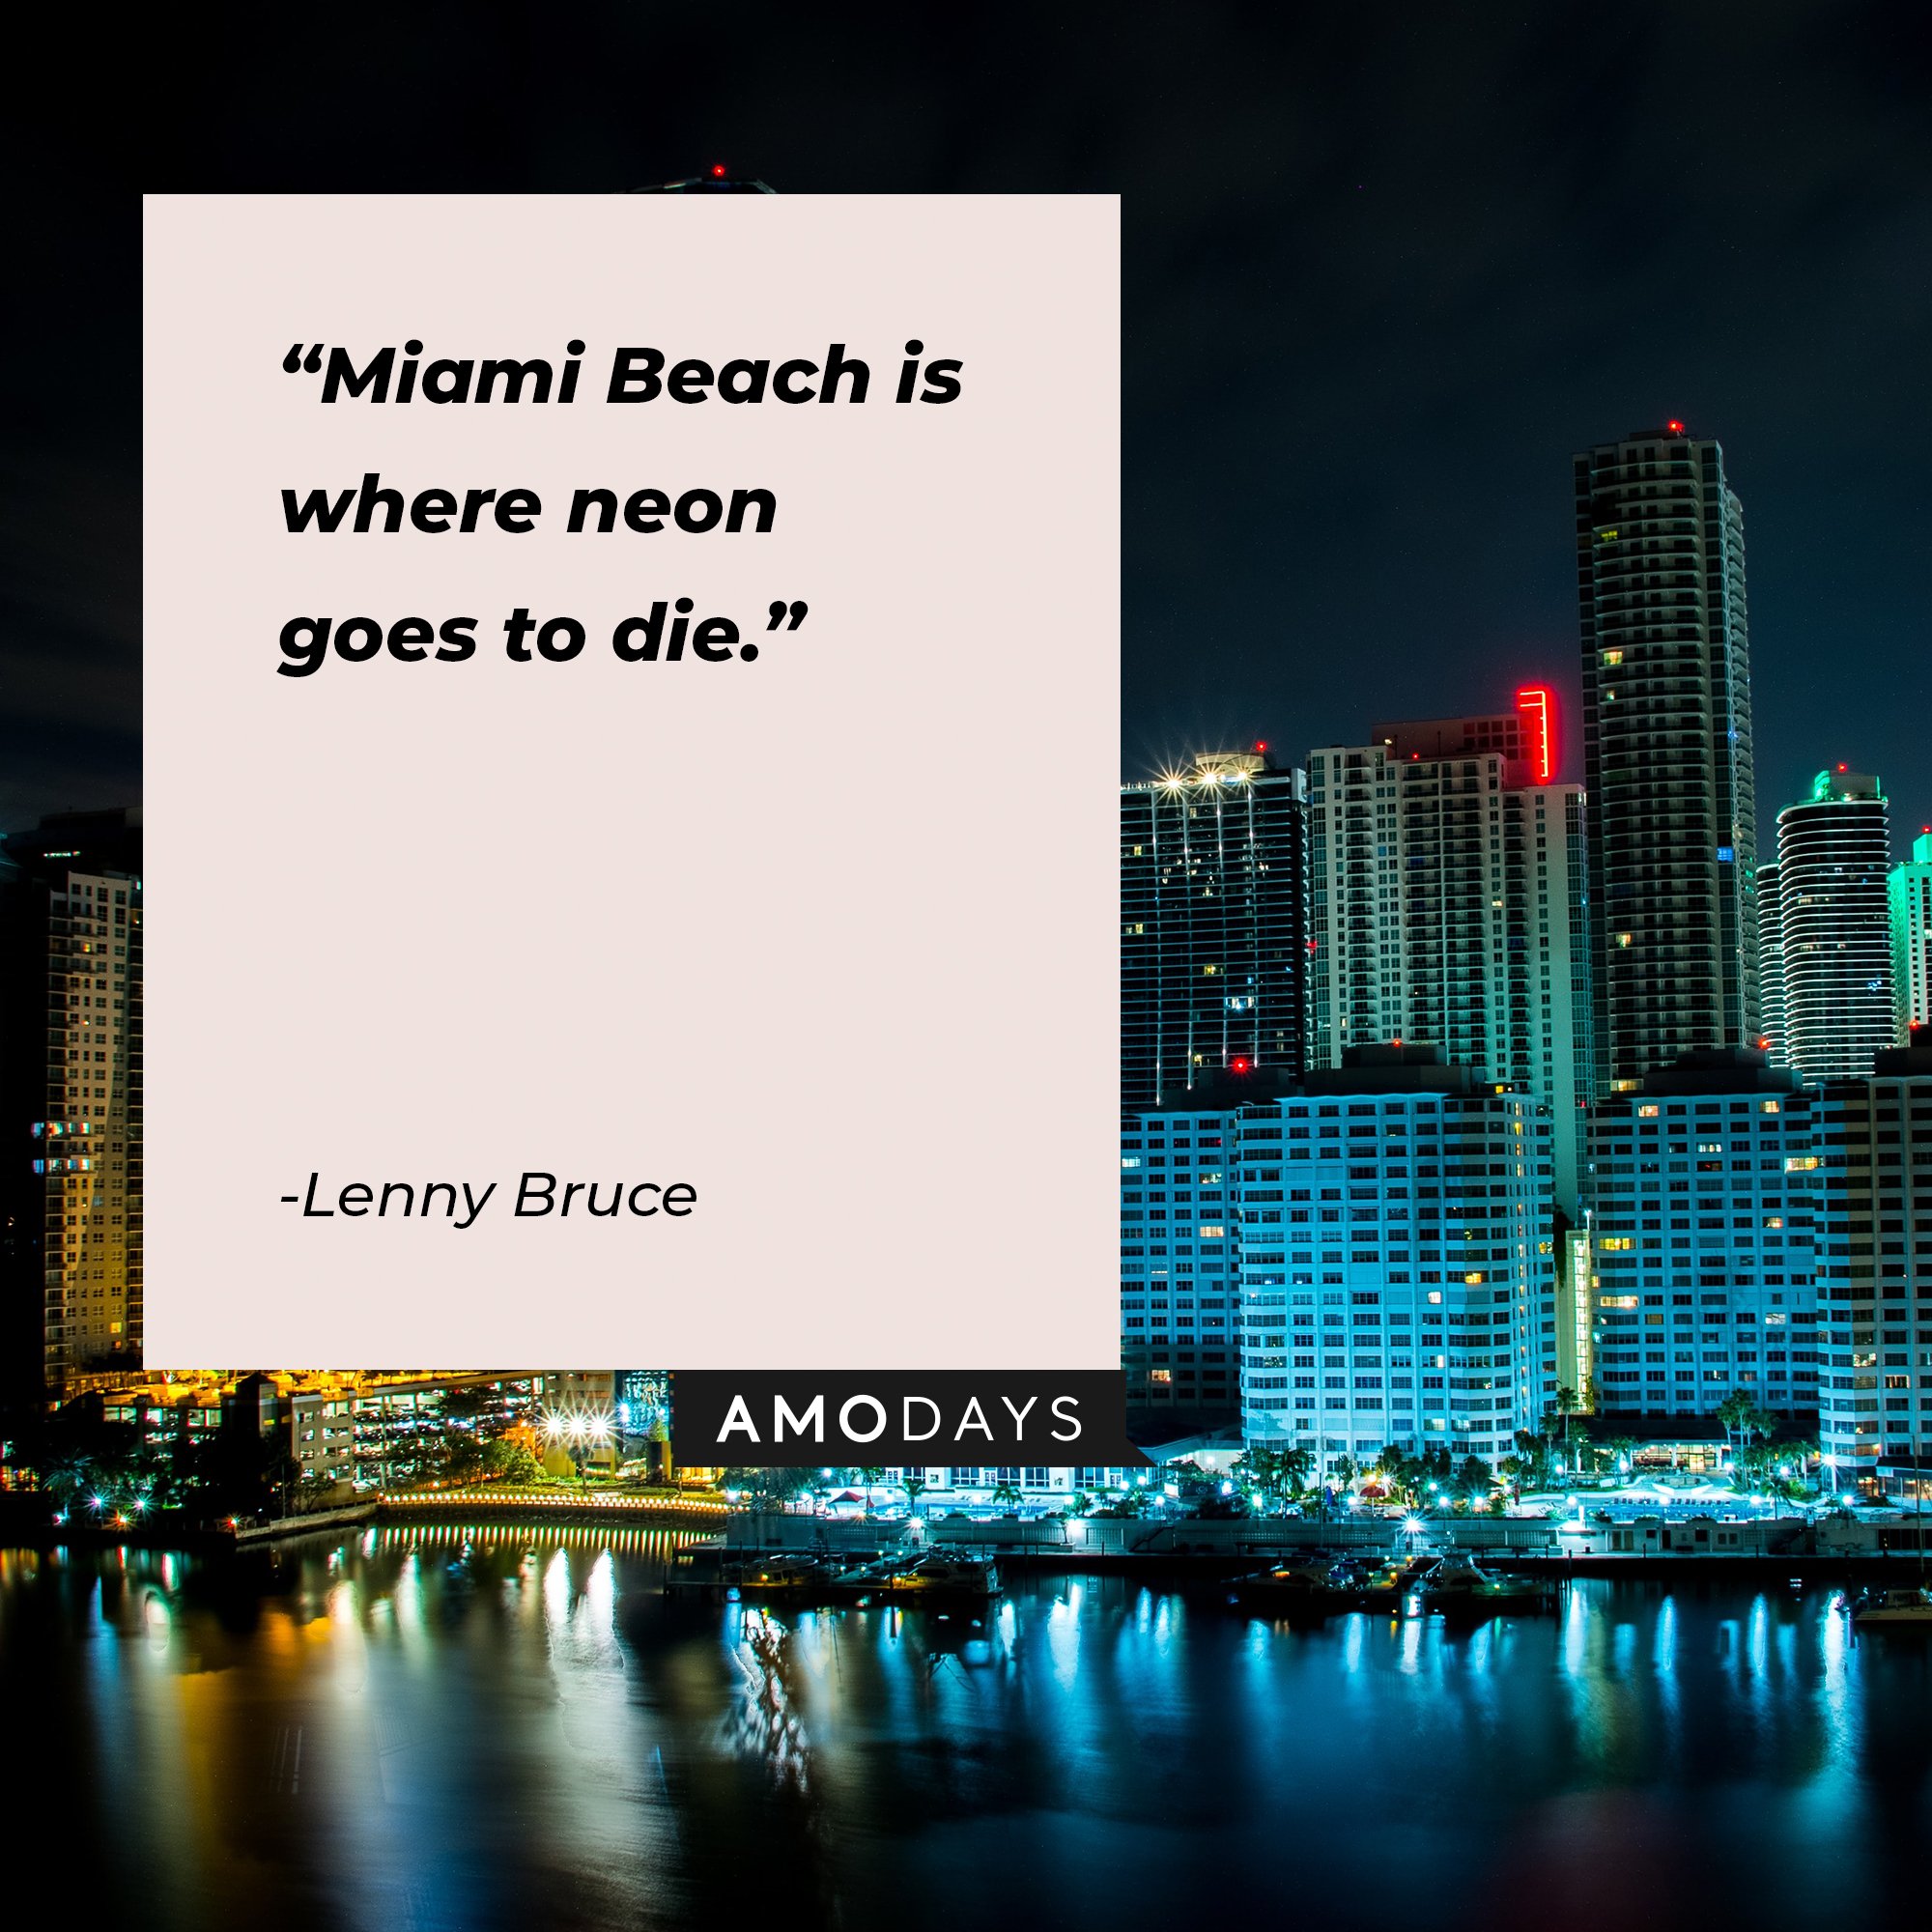 Lenny Bruce’s quote: "Miami Beach is where neon goes to die."  | Image: AmoDays